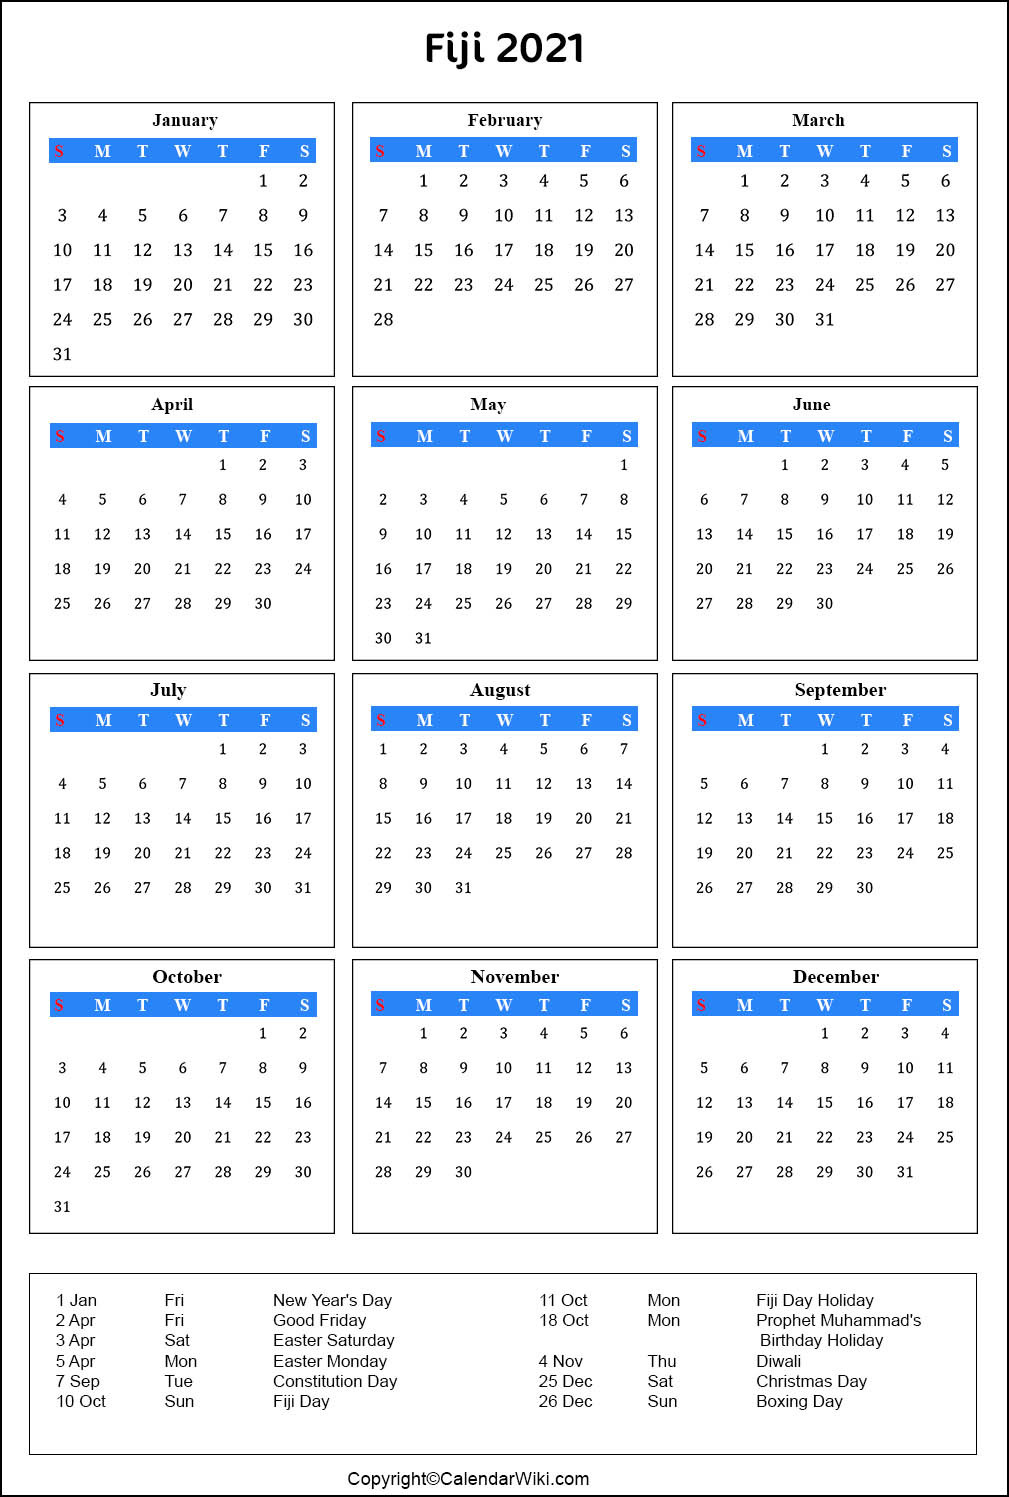 Download 2021 Calendar With School Terms And Public Holidays | Calendar ...